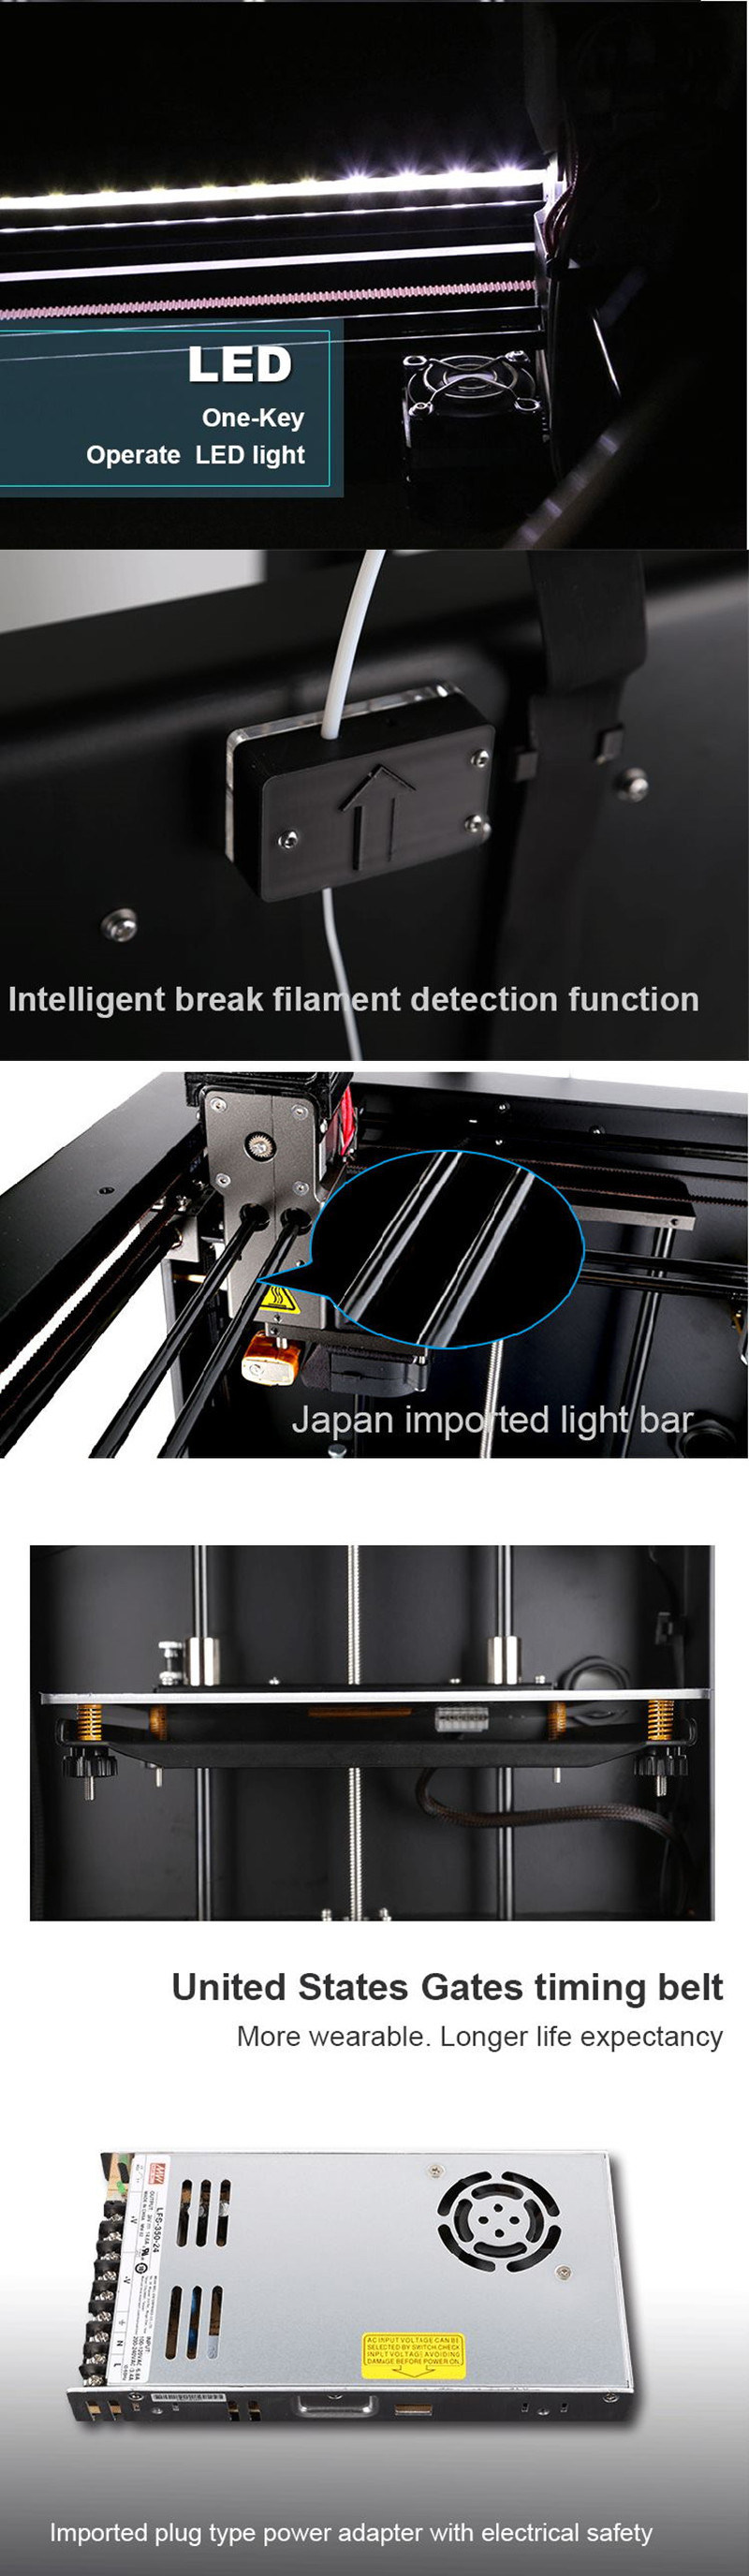 3D Printer FDM 3D Printers Metal Frame Sturdy Printing Professional For Education and Industry